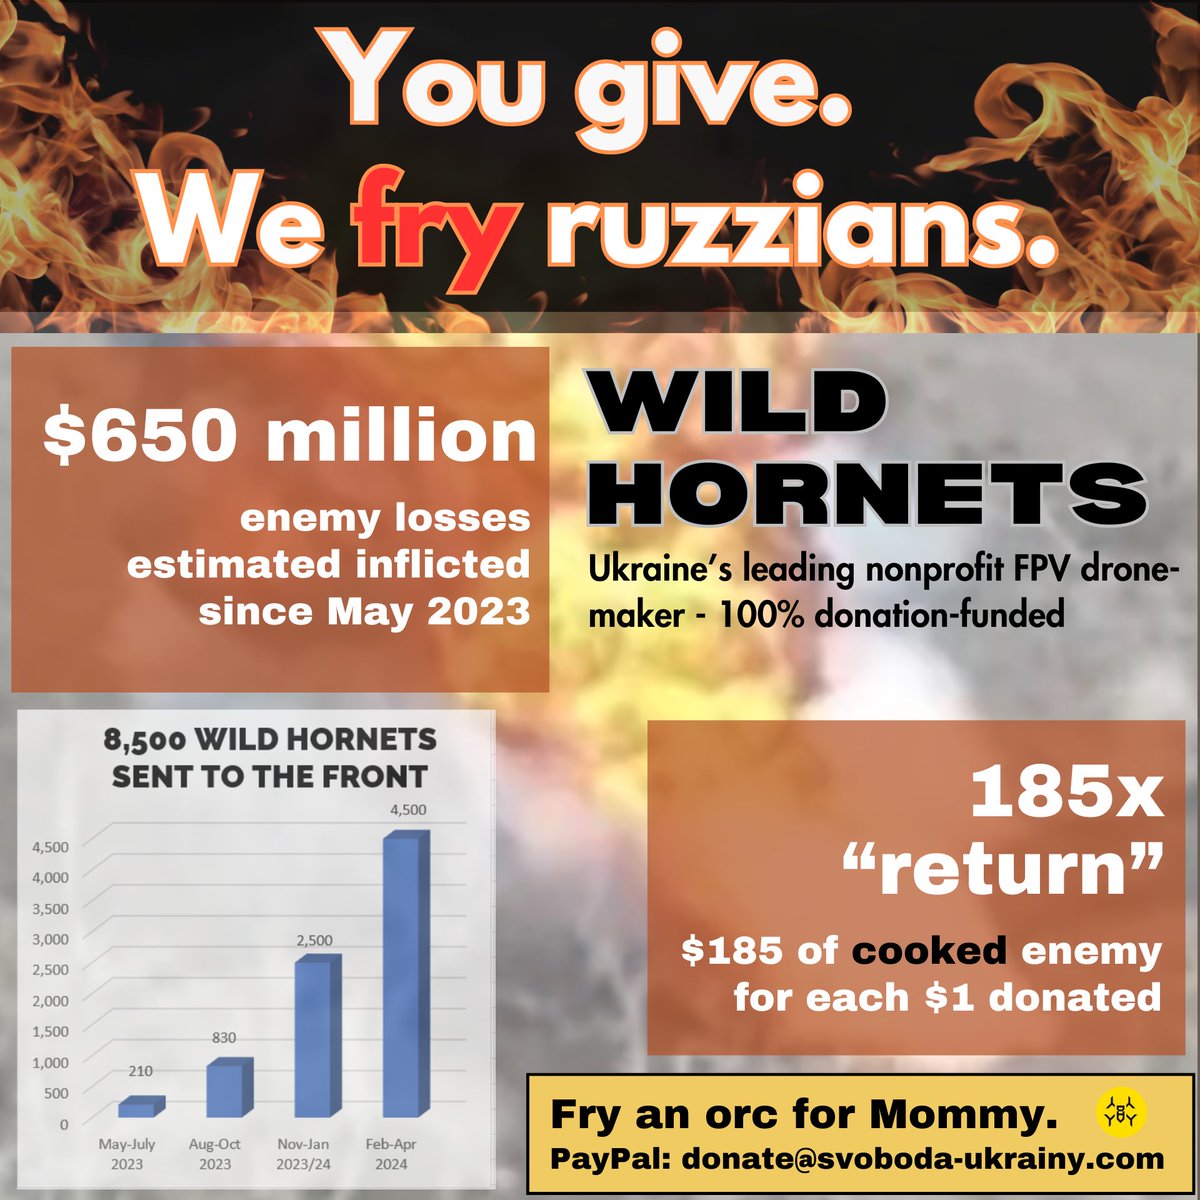 Thanks to your donations, FPV drones inflicted $650M in est. ruzzian losses in the past year💥 This is a 185x 'return' on your wise investment in freedom: $1 donated fried $185 of invader🔥 It includes $60M est. losses thanks to $325K donated by our Xitter community🙏♥…